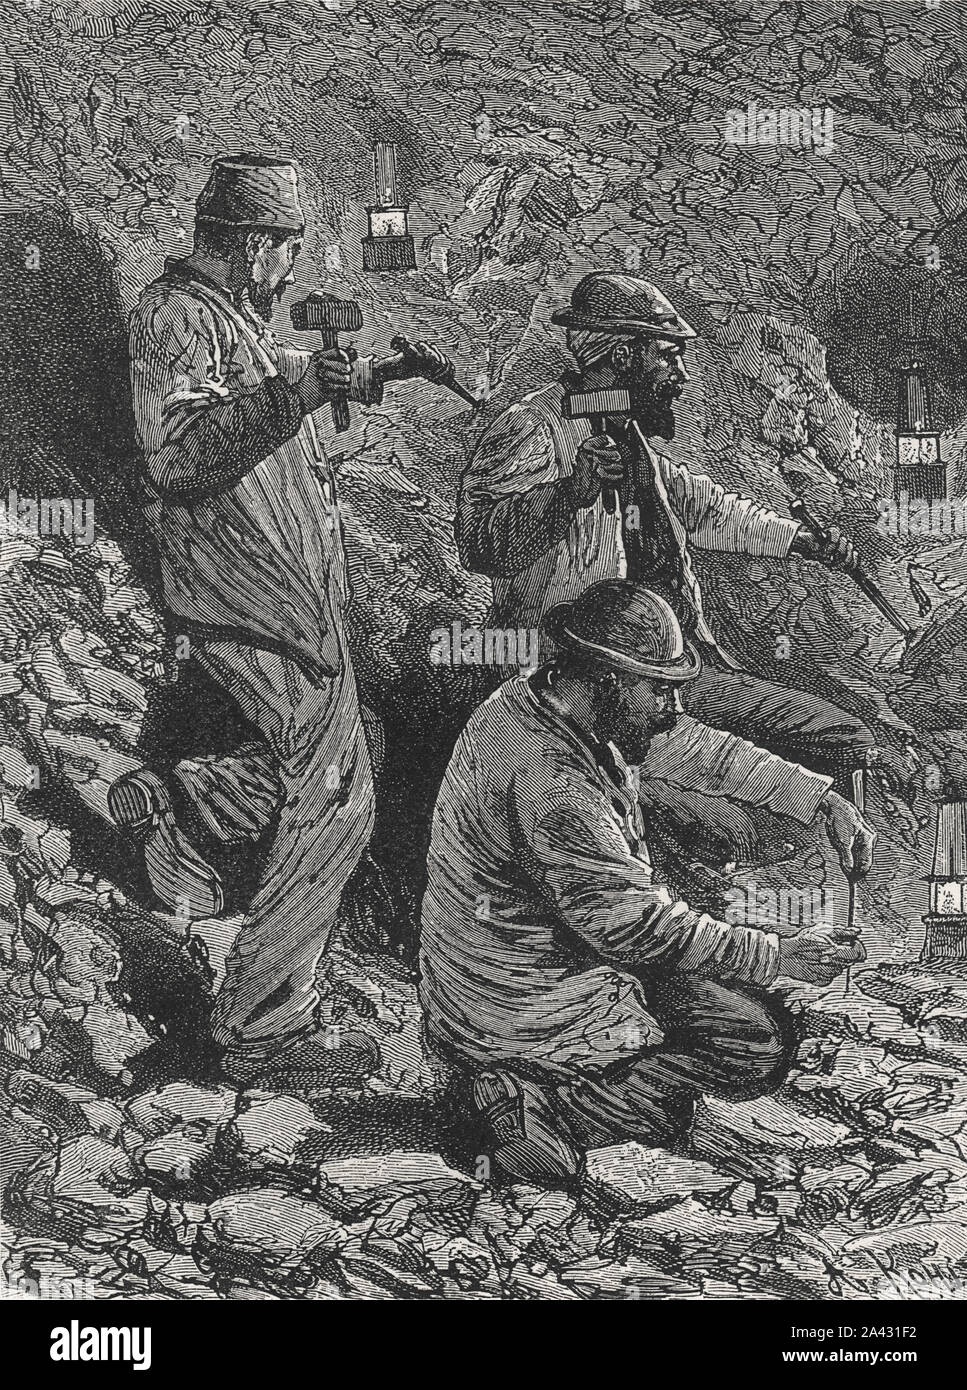 Drawings of Vasnetsov and Panov from the book: Life of European Peoples. Residents of the North. Author E.N. Vodovozova, 1899.  Miners. Coal mining in Belgium Stock Photo